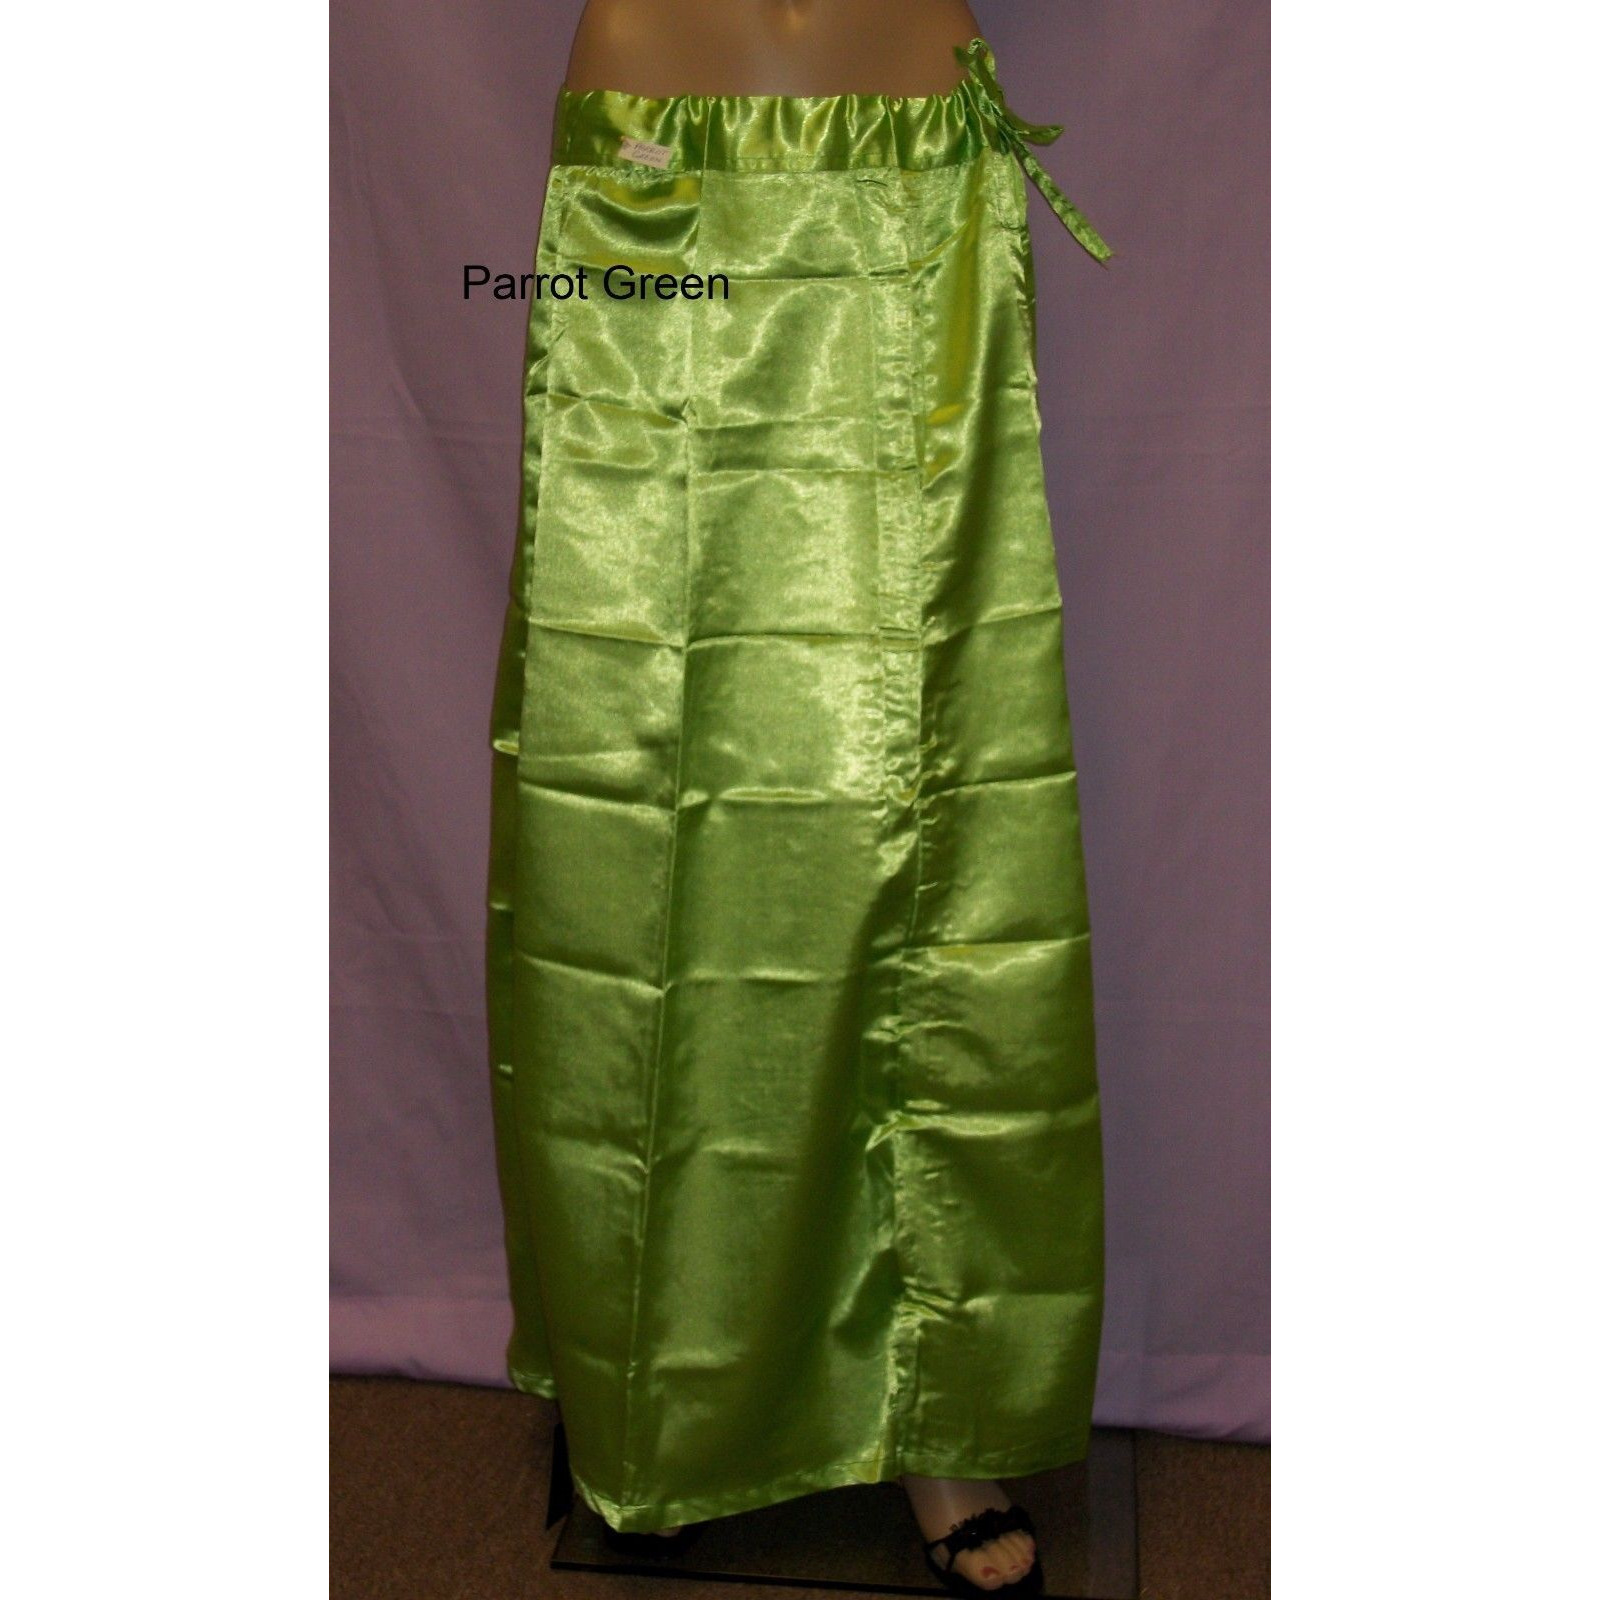 Petticoat 508 Satin Underskirt Inskirt Saree Petticoat Large Size Assorted Color (Color: Light Yellow #3452, Golden Yellow #3202,  Saffron Yellow #4195, Olive Green #3478, Celery Green #3817,  Bottle Green #3216, Light Green #7513,  Medium Green #3481, Peacock Green #7511, Parrot Green #3476, Turquoise Blue #3205,  Light Blue #3472, Burgundy #2630,  Maroon #2617, Red #3821,  Light Pink #4198,  Medium Pink #4200,  Melon Pink #3469,  Salmon Pink #3466,  Light Purple #3459,  Silver #7514,  Copper G